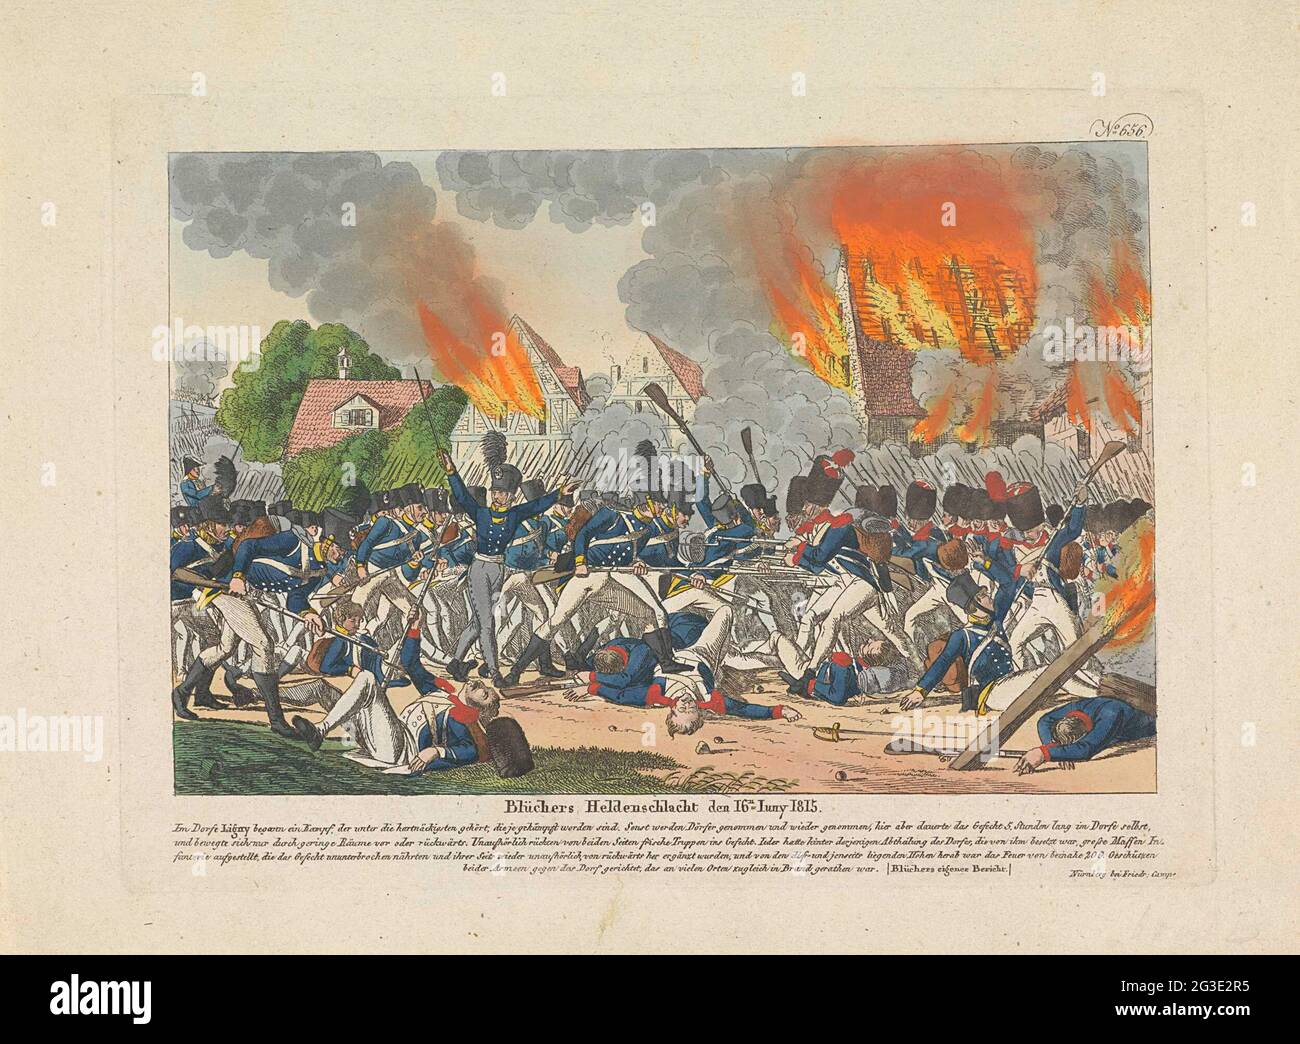 Battle of Ligny, 1815; Blüchers Heldenschlacht den 16n Iuny 1815. Severe battles in the village of Ligny on June 16, 1815 between Prussian troops under General von Blücher and French troops under Napoleon. With the description of the battles in a four-line German caption. At the top right numbered: No. 656. Stock Photo